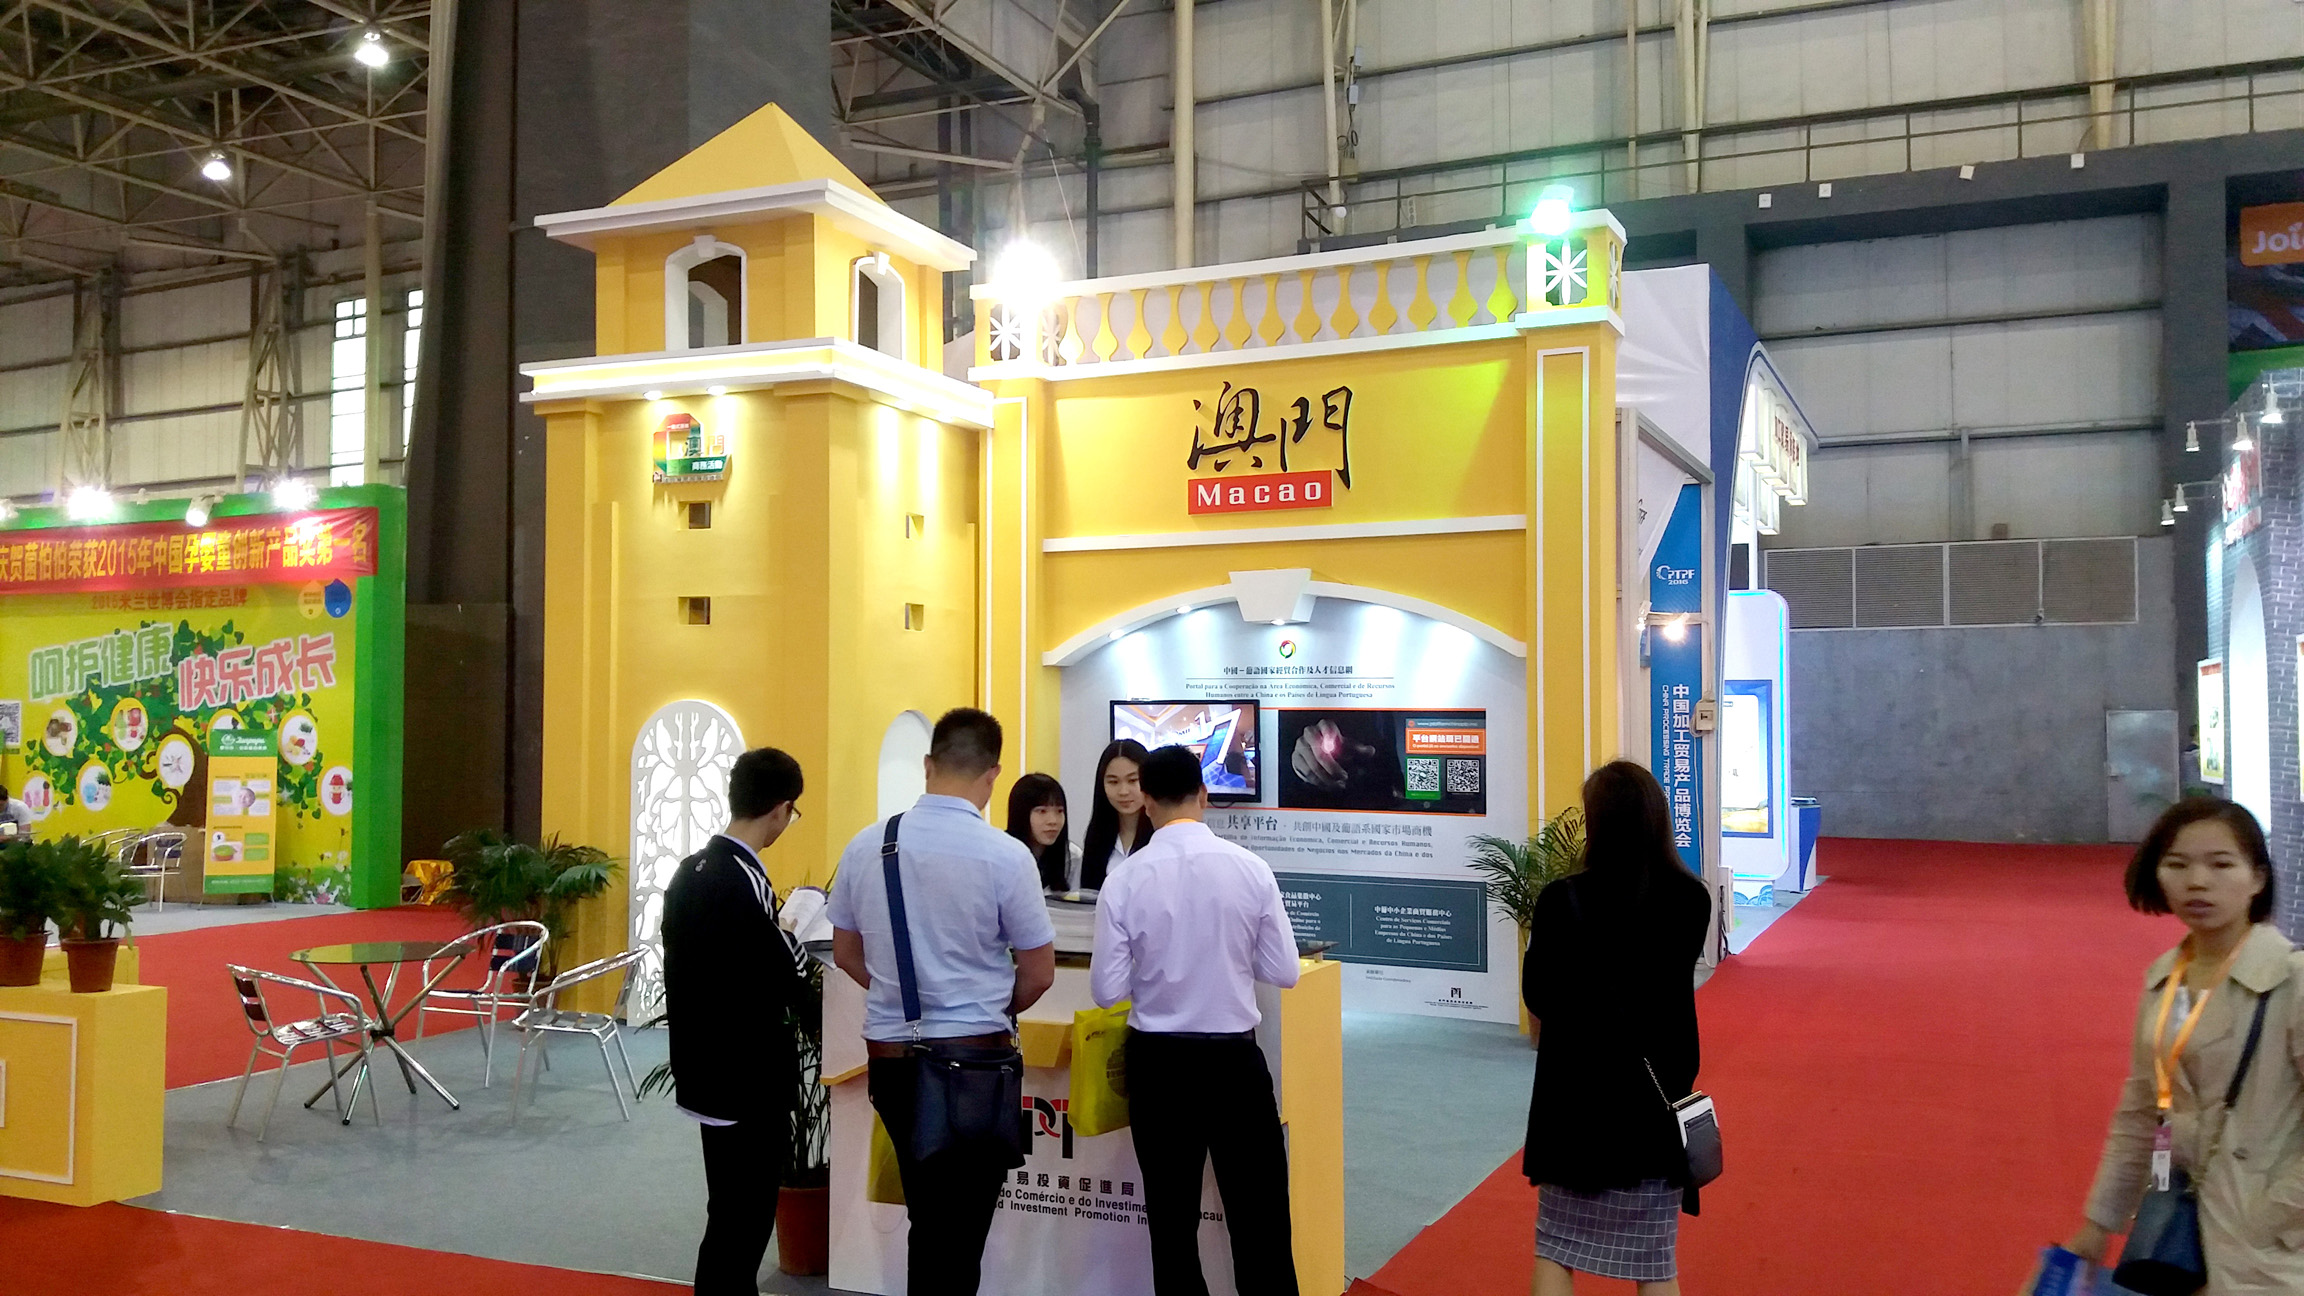 IPIM sets up a Macao Pavilion at the China Processing Trade Products Fair in Dongguan (21-24 April 2016)